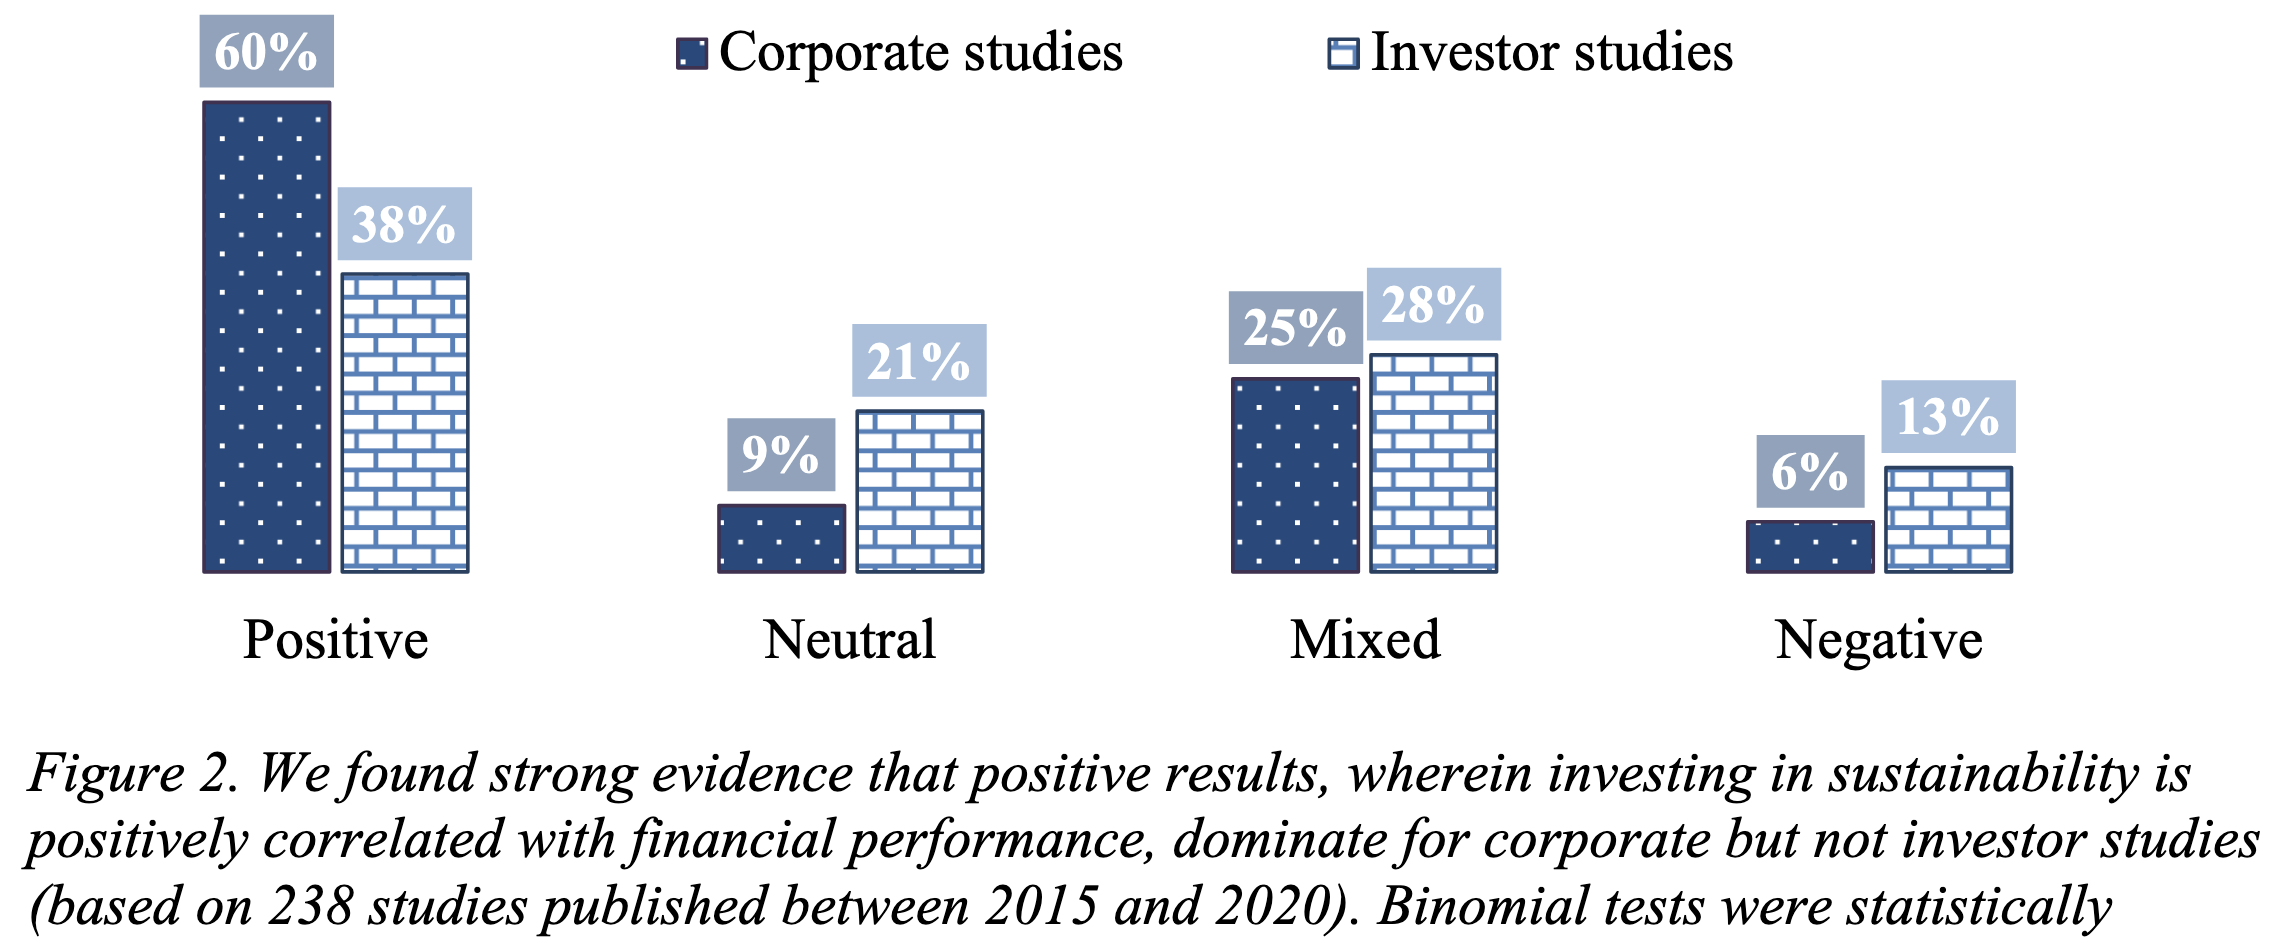 The bar chart shows four times two columns, split by corporate and investor studies, which illustrates the relative frequency a study reached a positive, mixed, neutral, or negative conclusion.